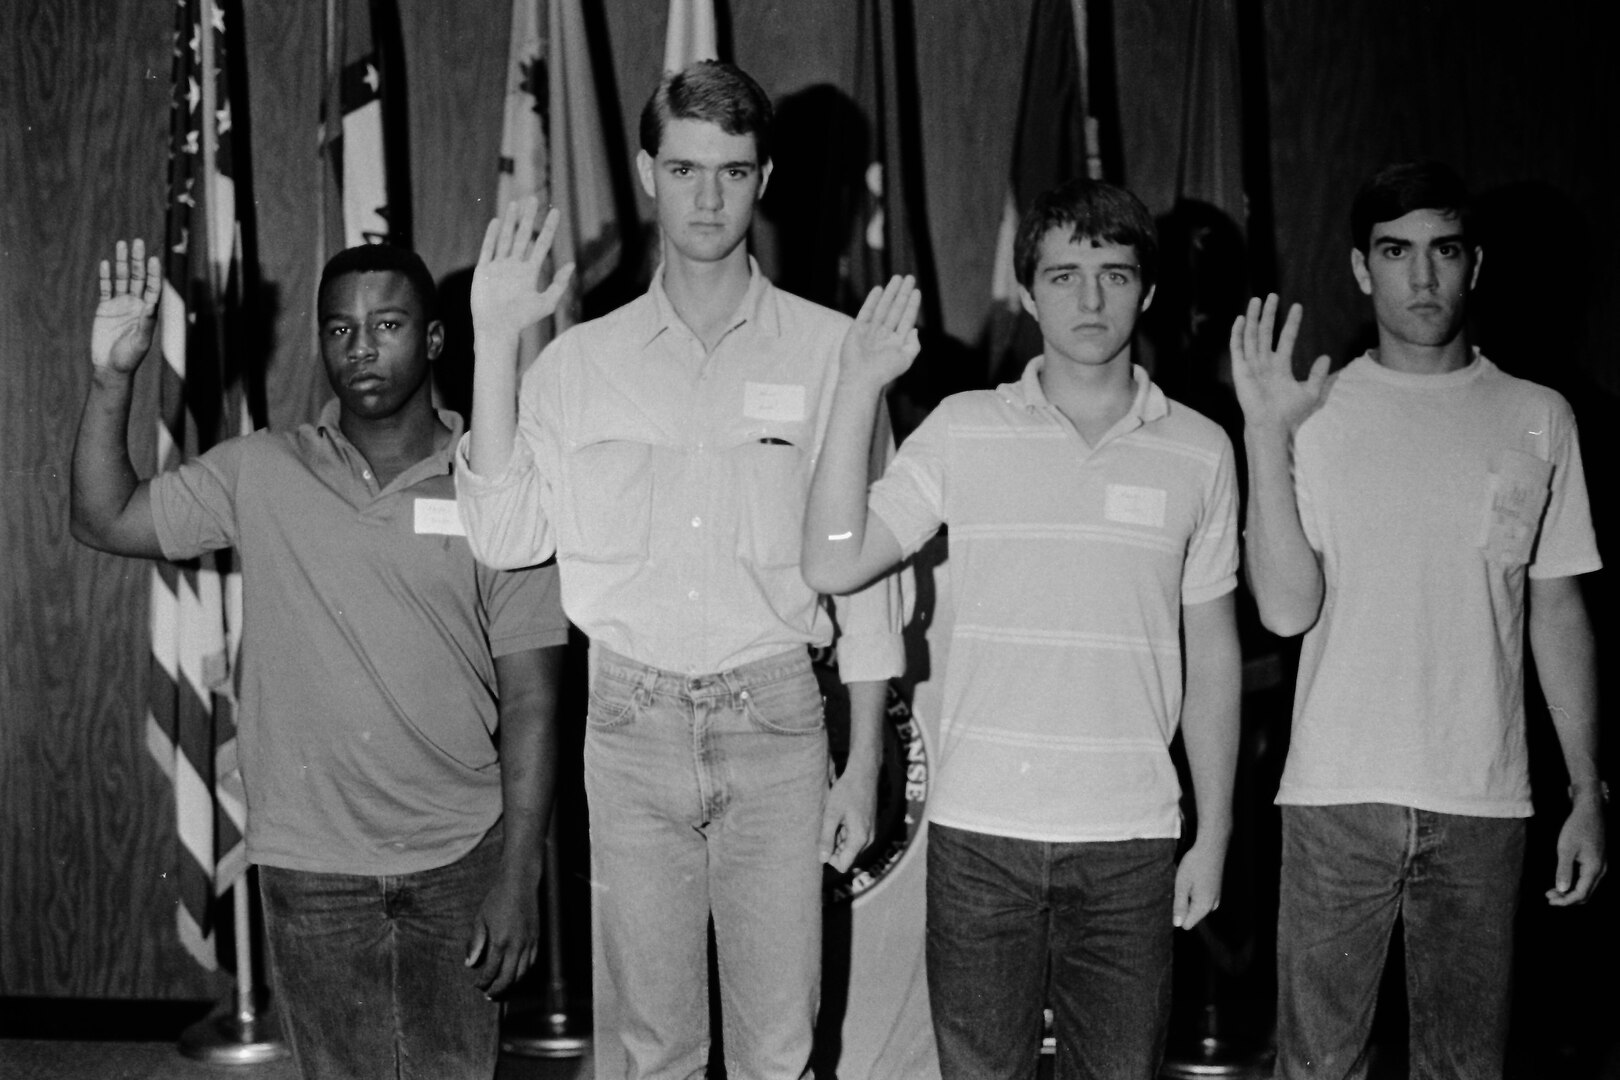 Four young men stand with their right hands raised during an enlistment.